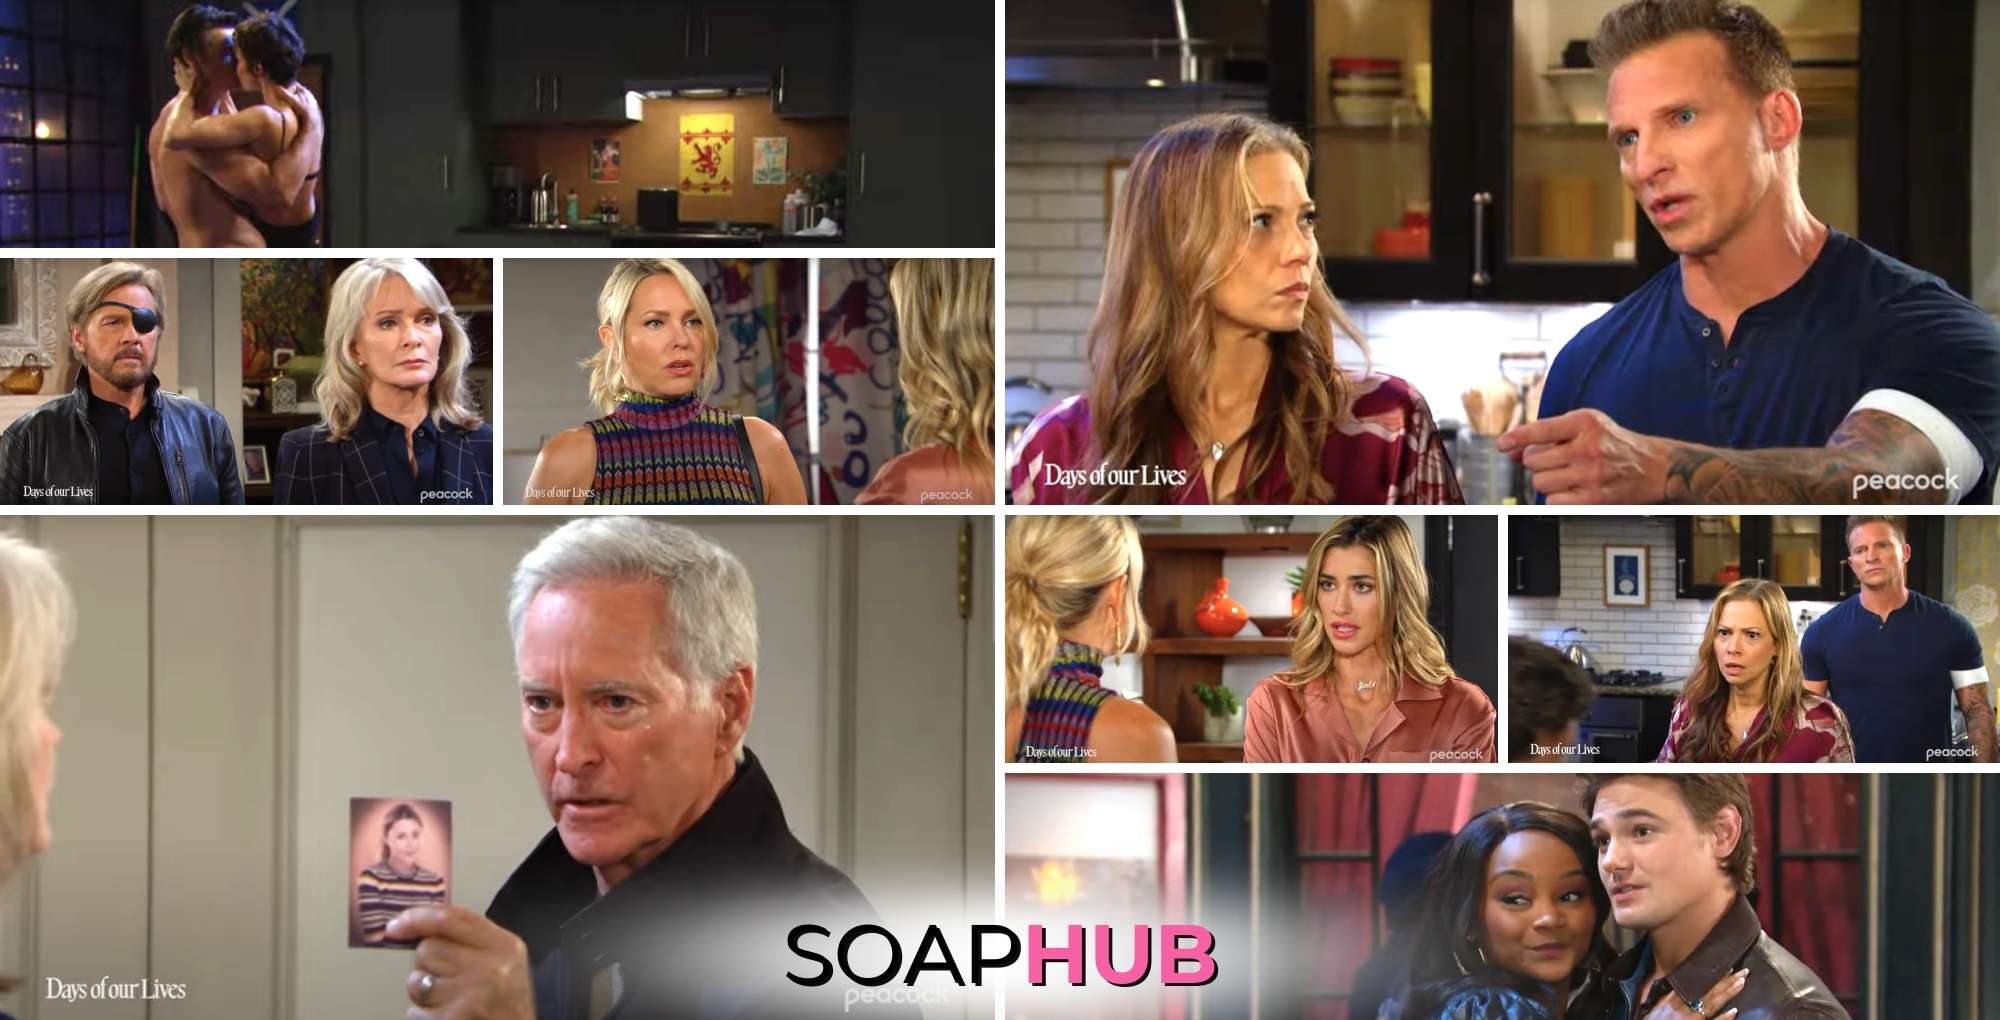 Collage for the Days of our Lives spoilers weekly promo video for the week of March 18 with the Soap Hub logo across the bottom.